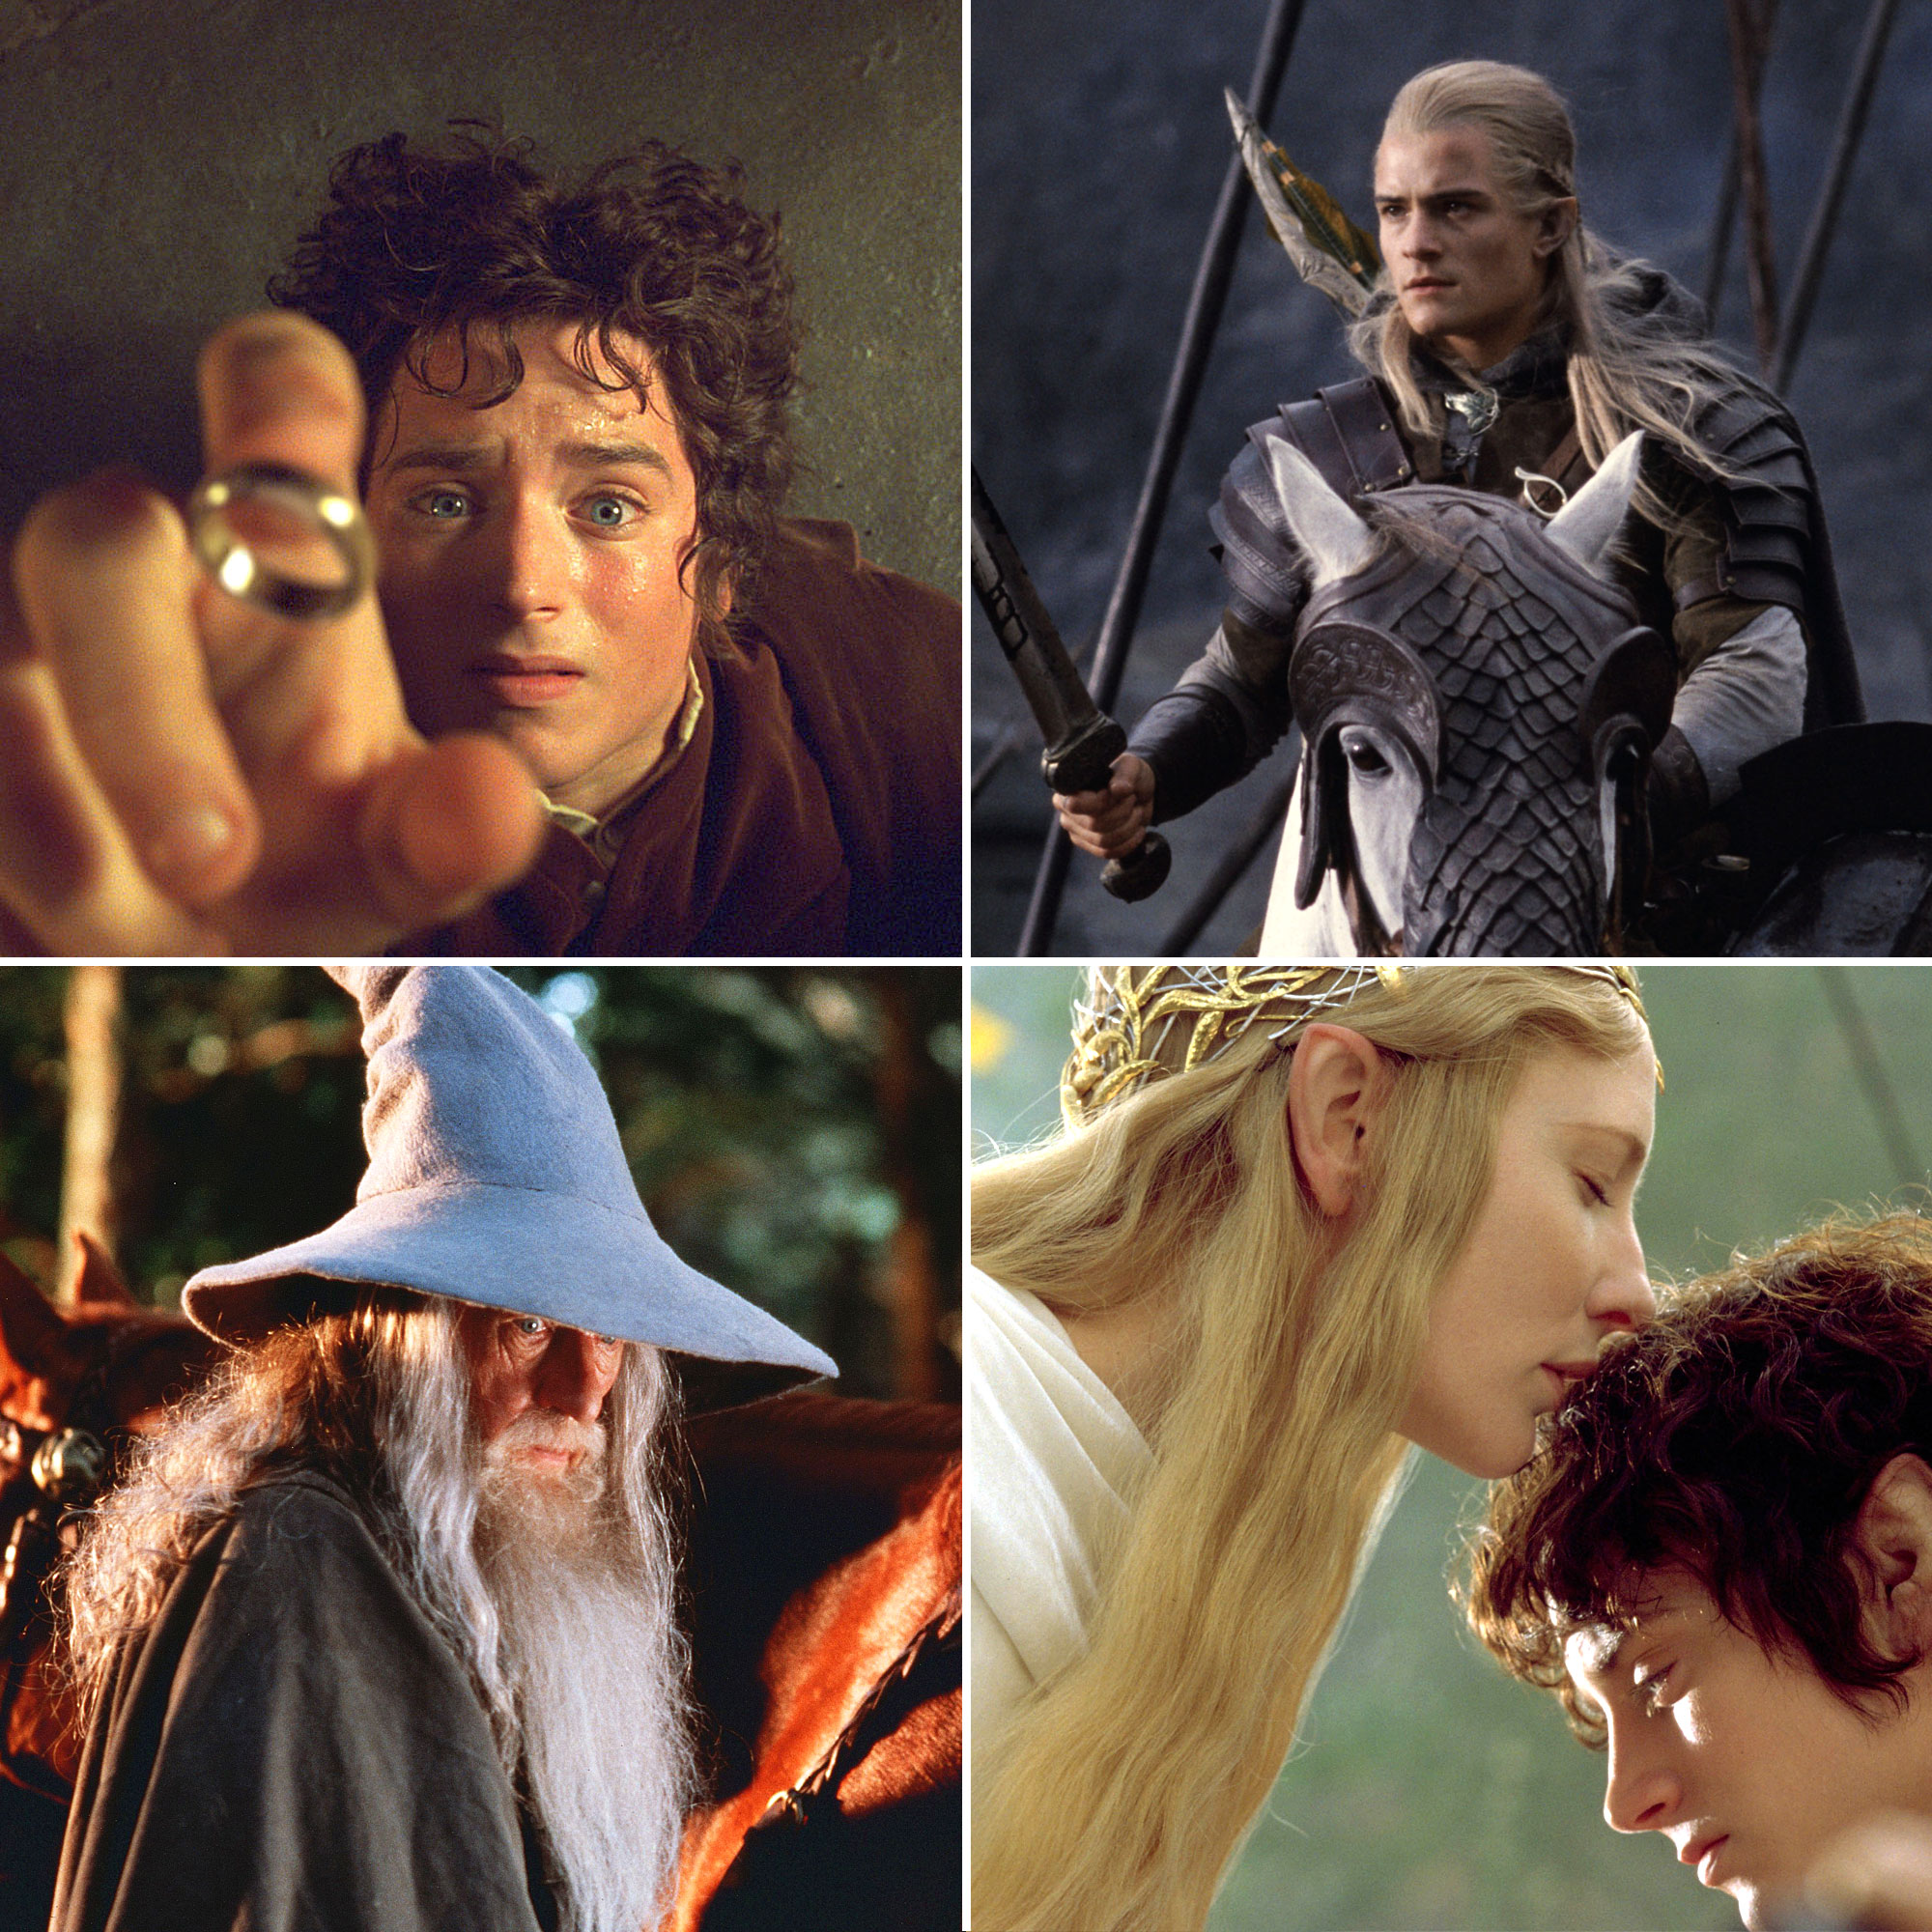 The Lord of the Rings: The Return of the King with members of The